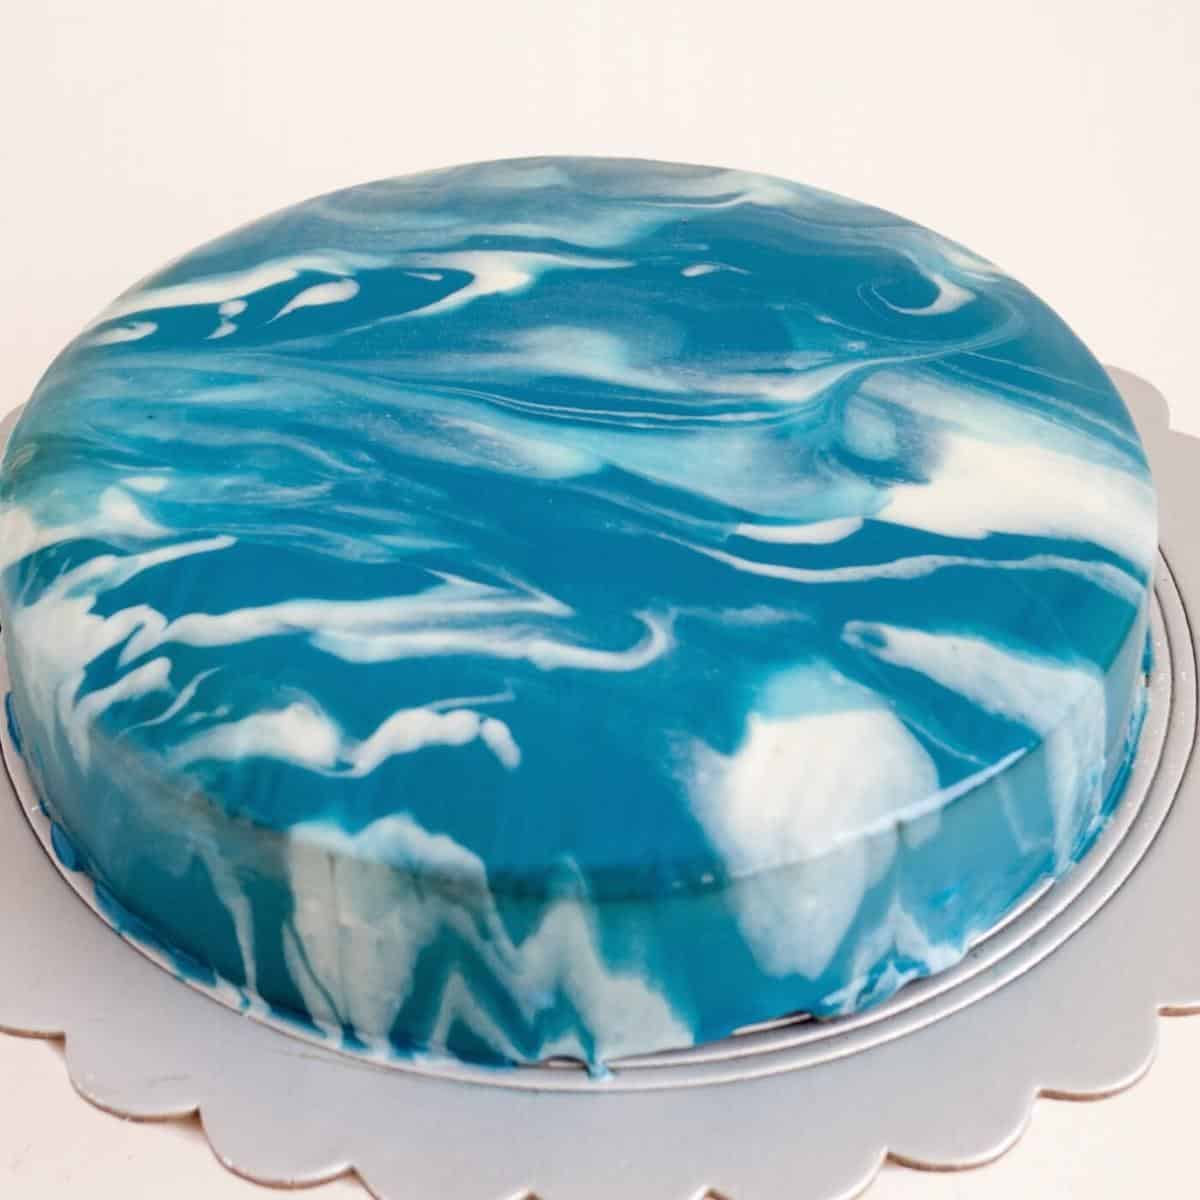 Cake with mirror glaze in blue and white.